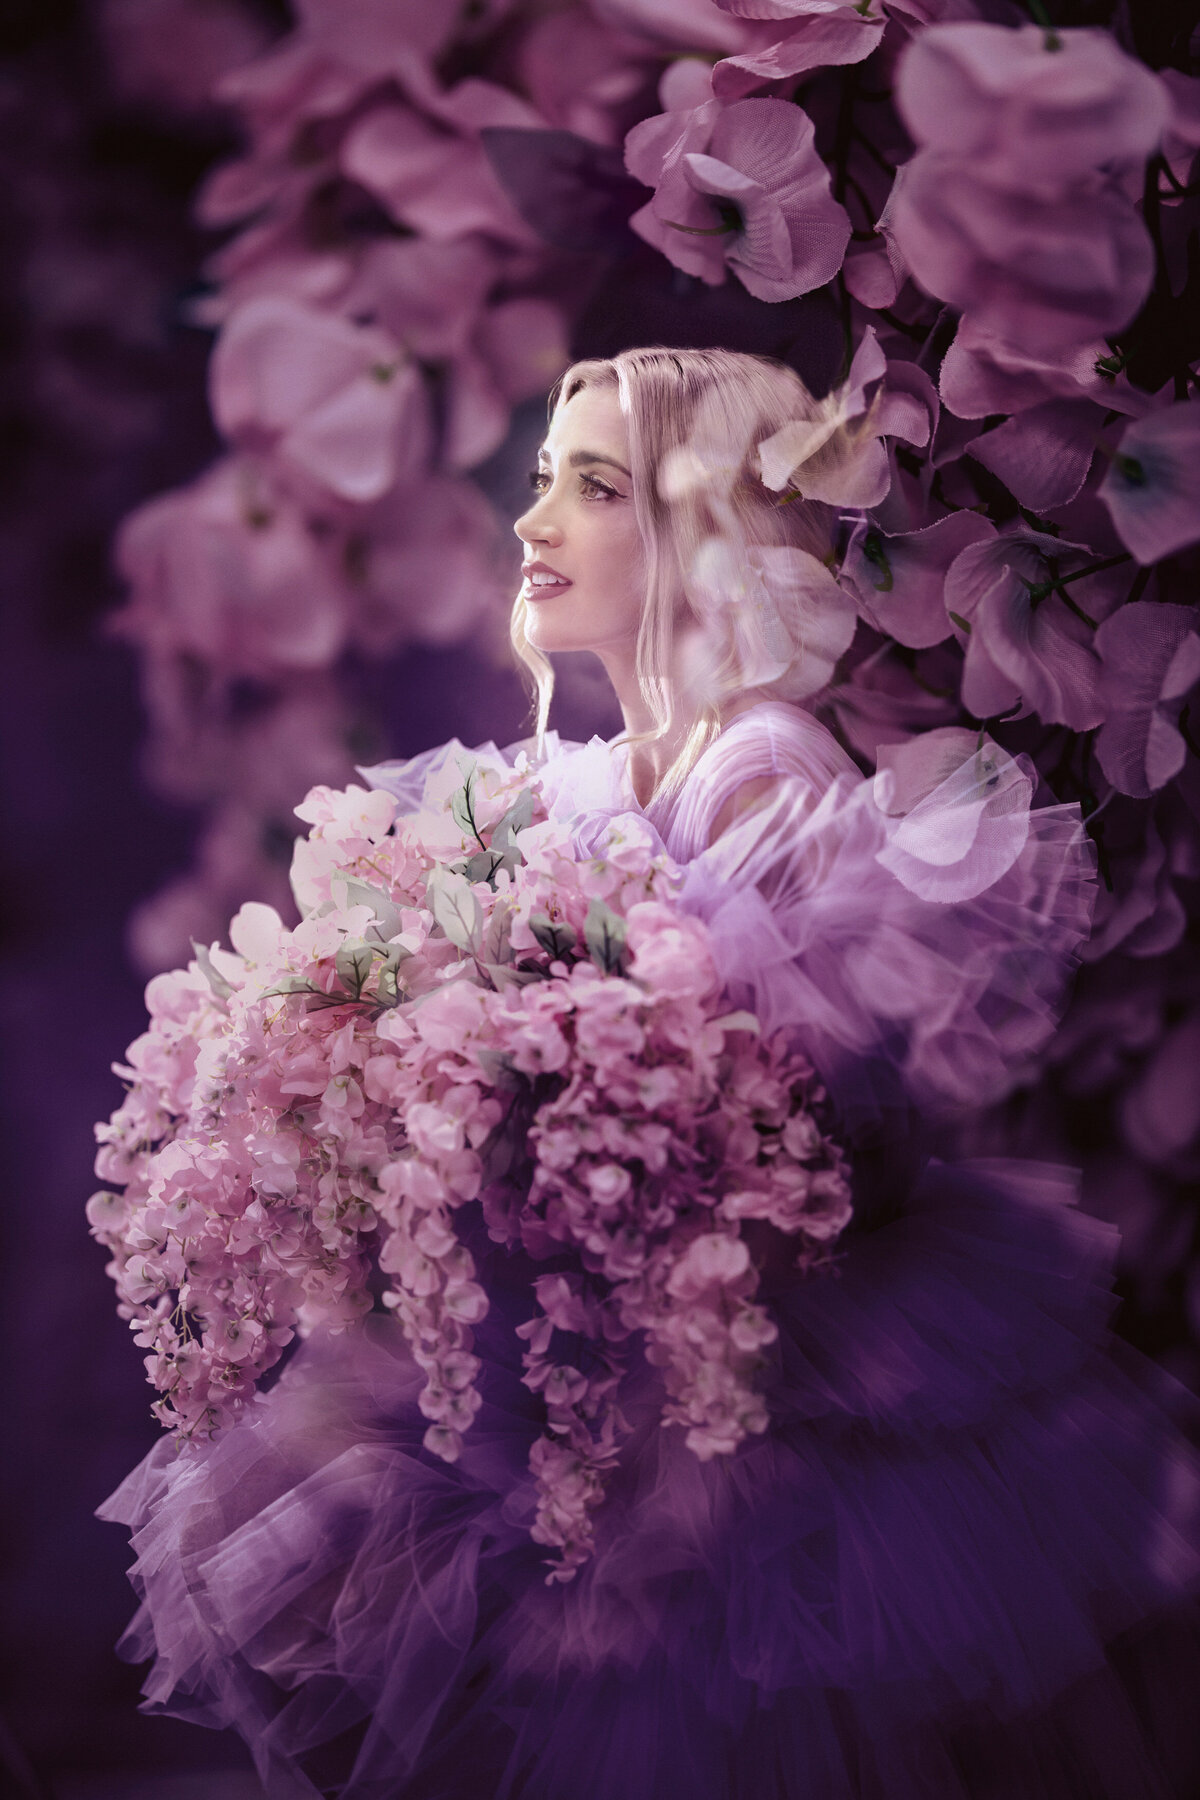 A woman with purple flowers all around her.